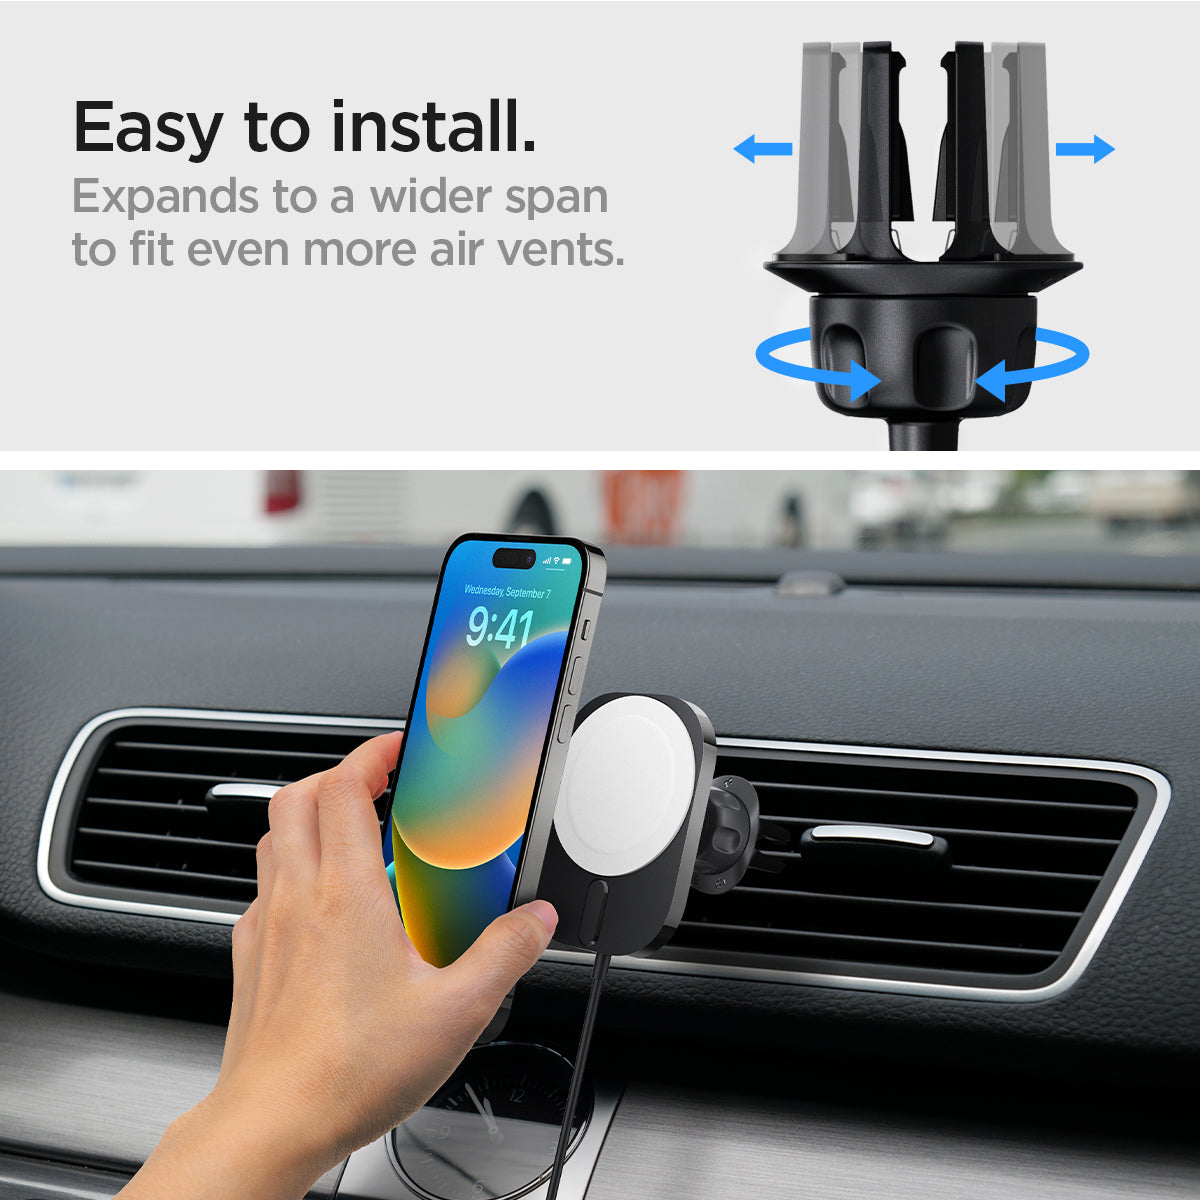 ACP03694 - OneTap Pro 3 Air Vent Car Mount ITM12W (MagFit) showing the Easy to install. Expands to a wider span to fit even more air vents. A man holding a device attaching it to the car mount